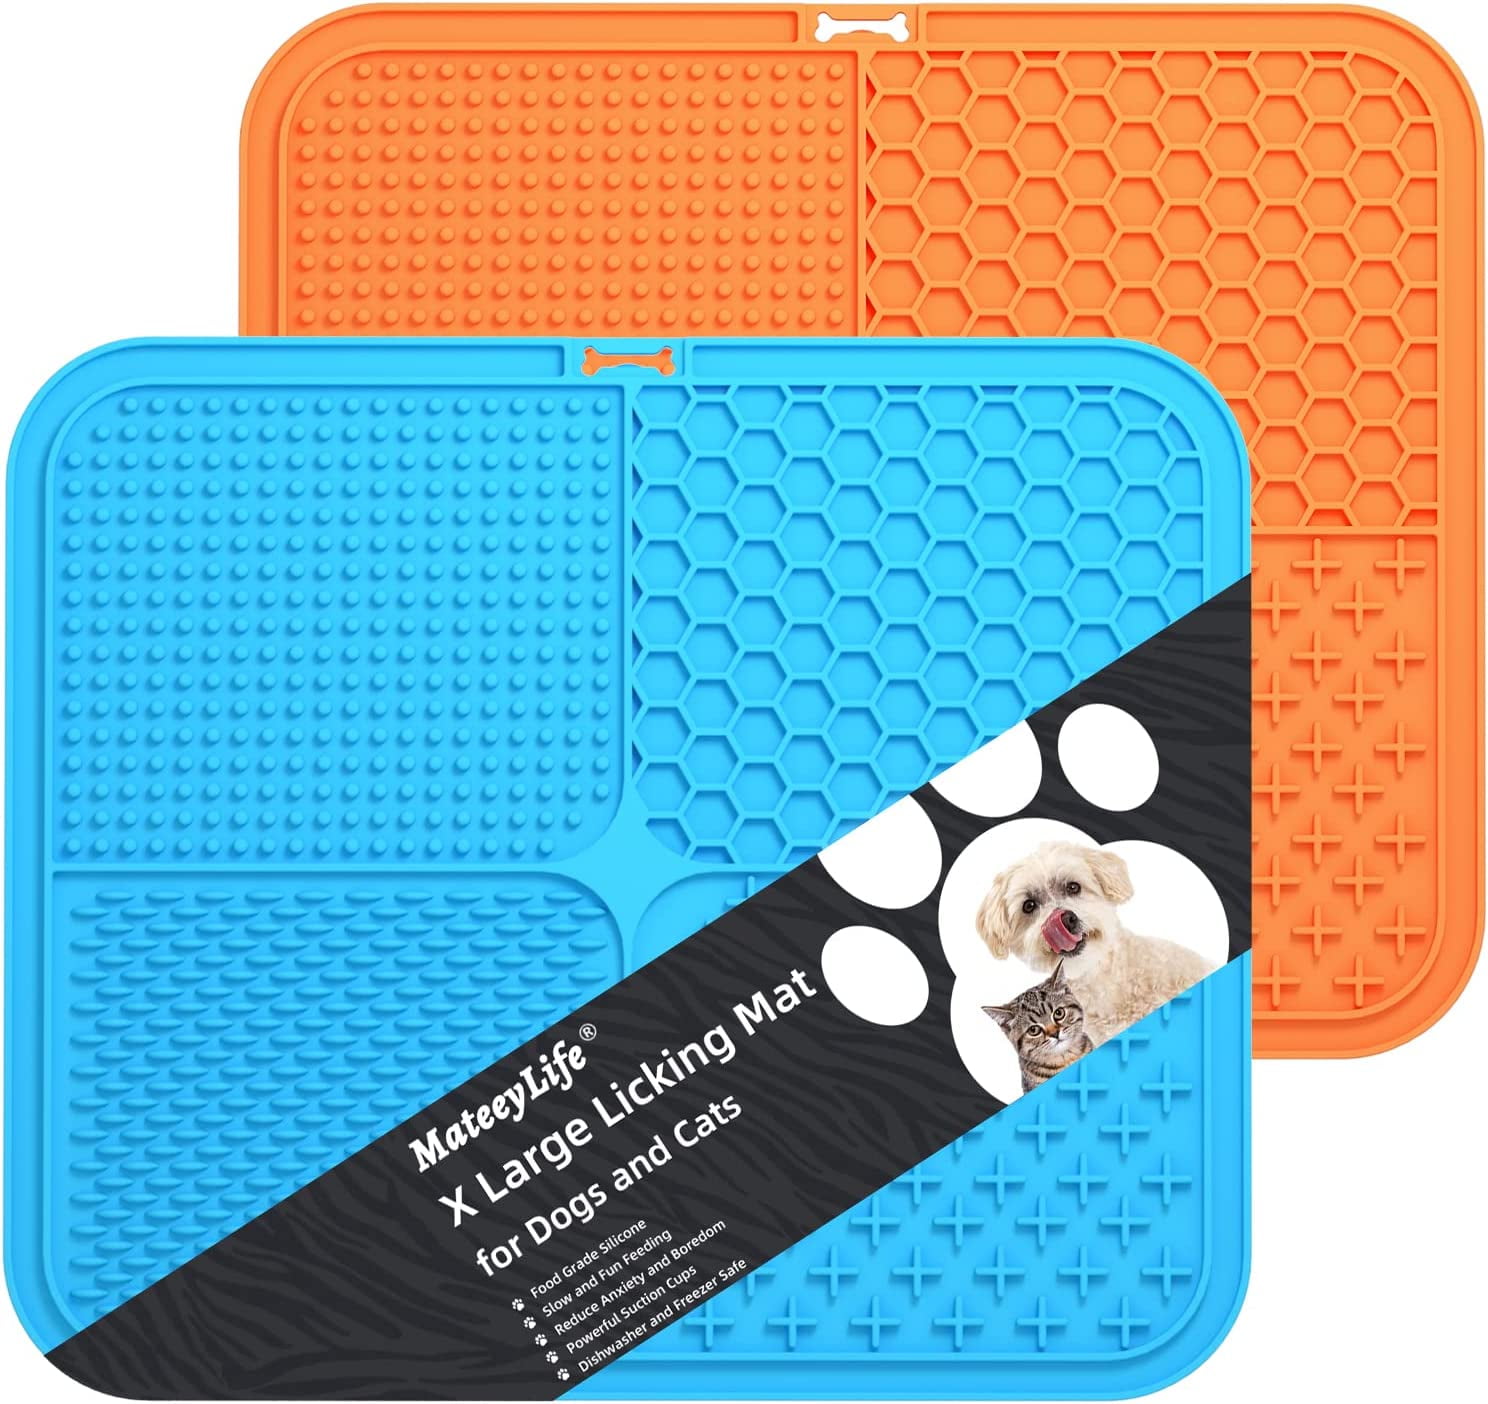 MateeyLife Licking Mat for Dogs and Cats, Premium Lick Mats with Suction  Cups for Dog Anxiety Relief, Cat Lick Pad for Boredom Reducer, Dog Treat Mat  Perfect for Bathing Grooming etc. 